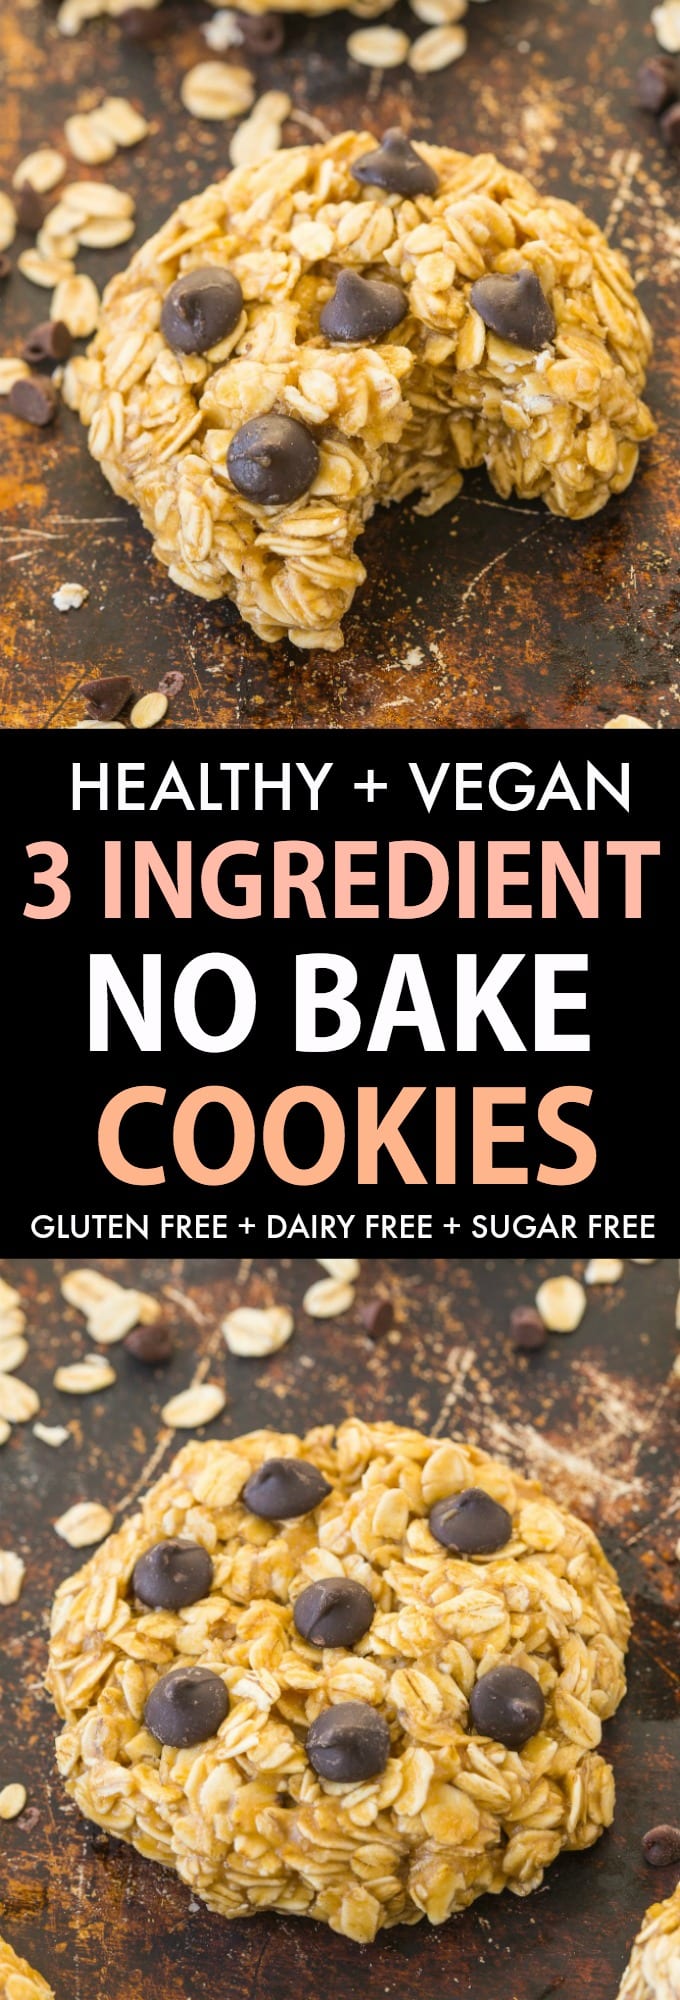 3 Ingredient Vegan No Bake Cookies with oatmeal and chocolate chips